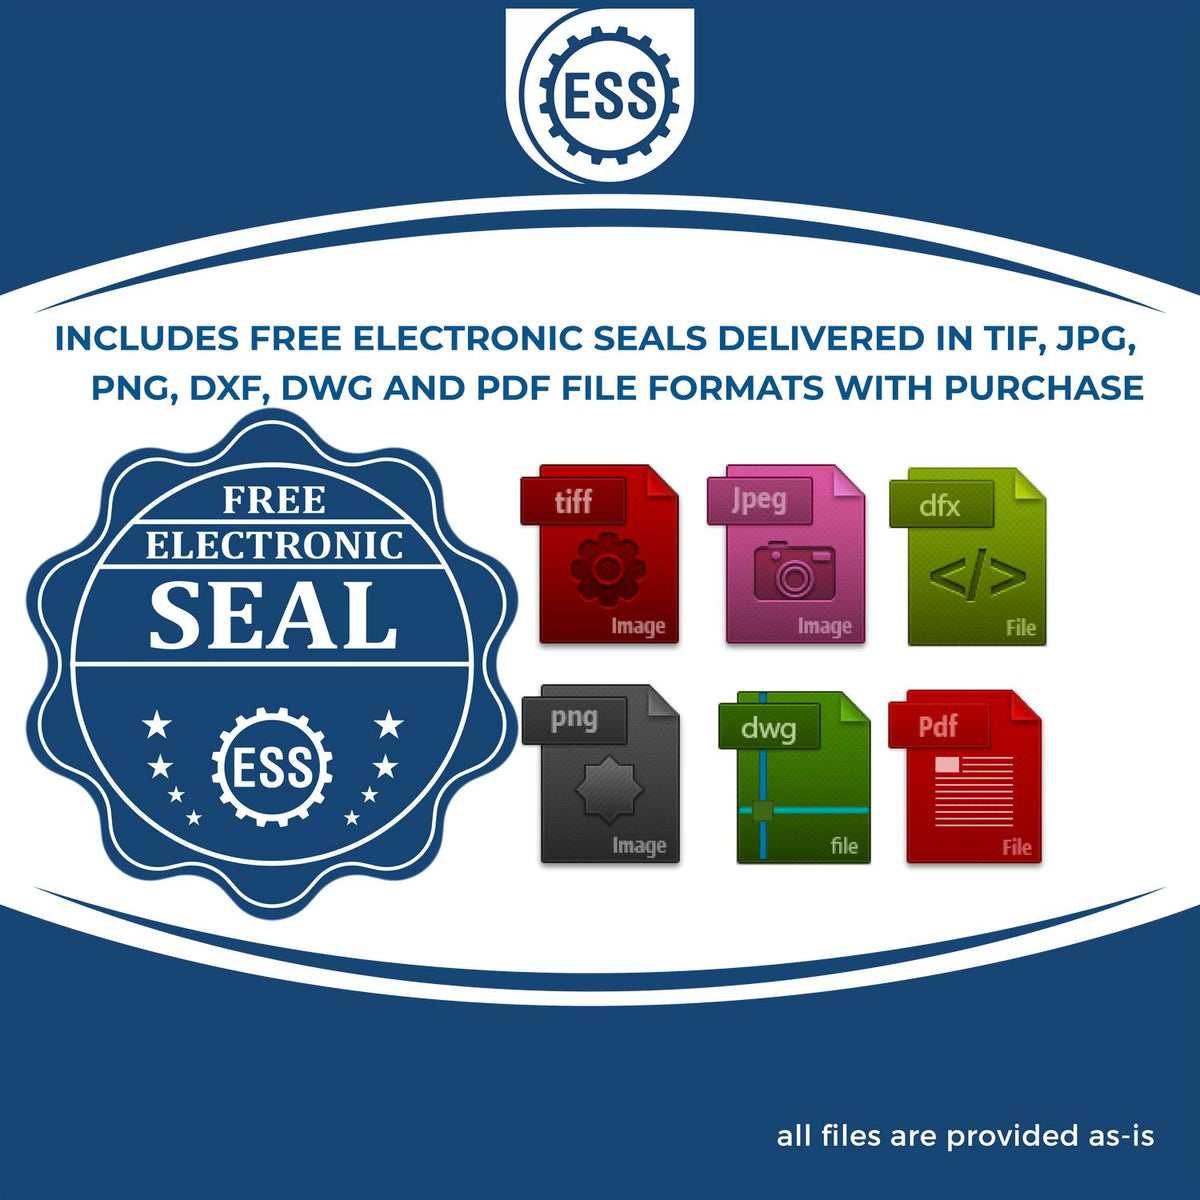 An infographic for the free electronic seal for the Self-Inking Alaska PE Stamp illustrating the different file type icons such as DXF, DWG, TIF, JPG and PNG.